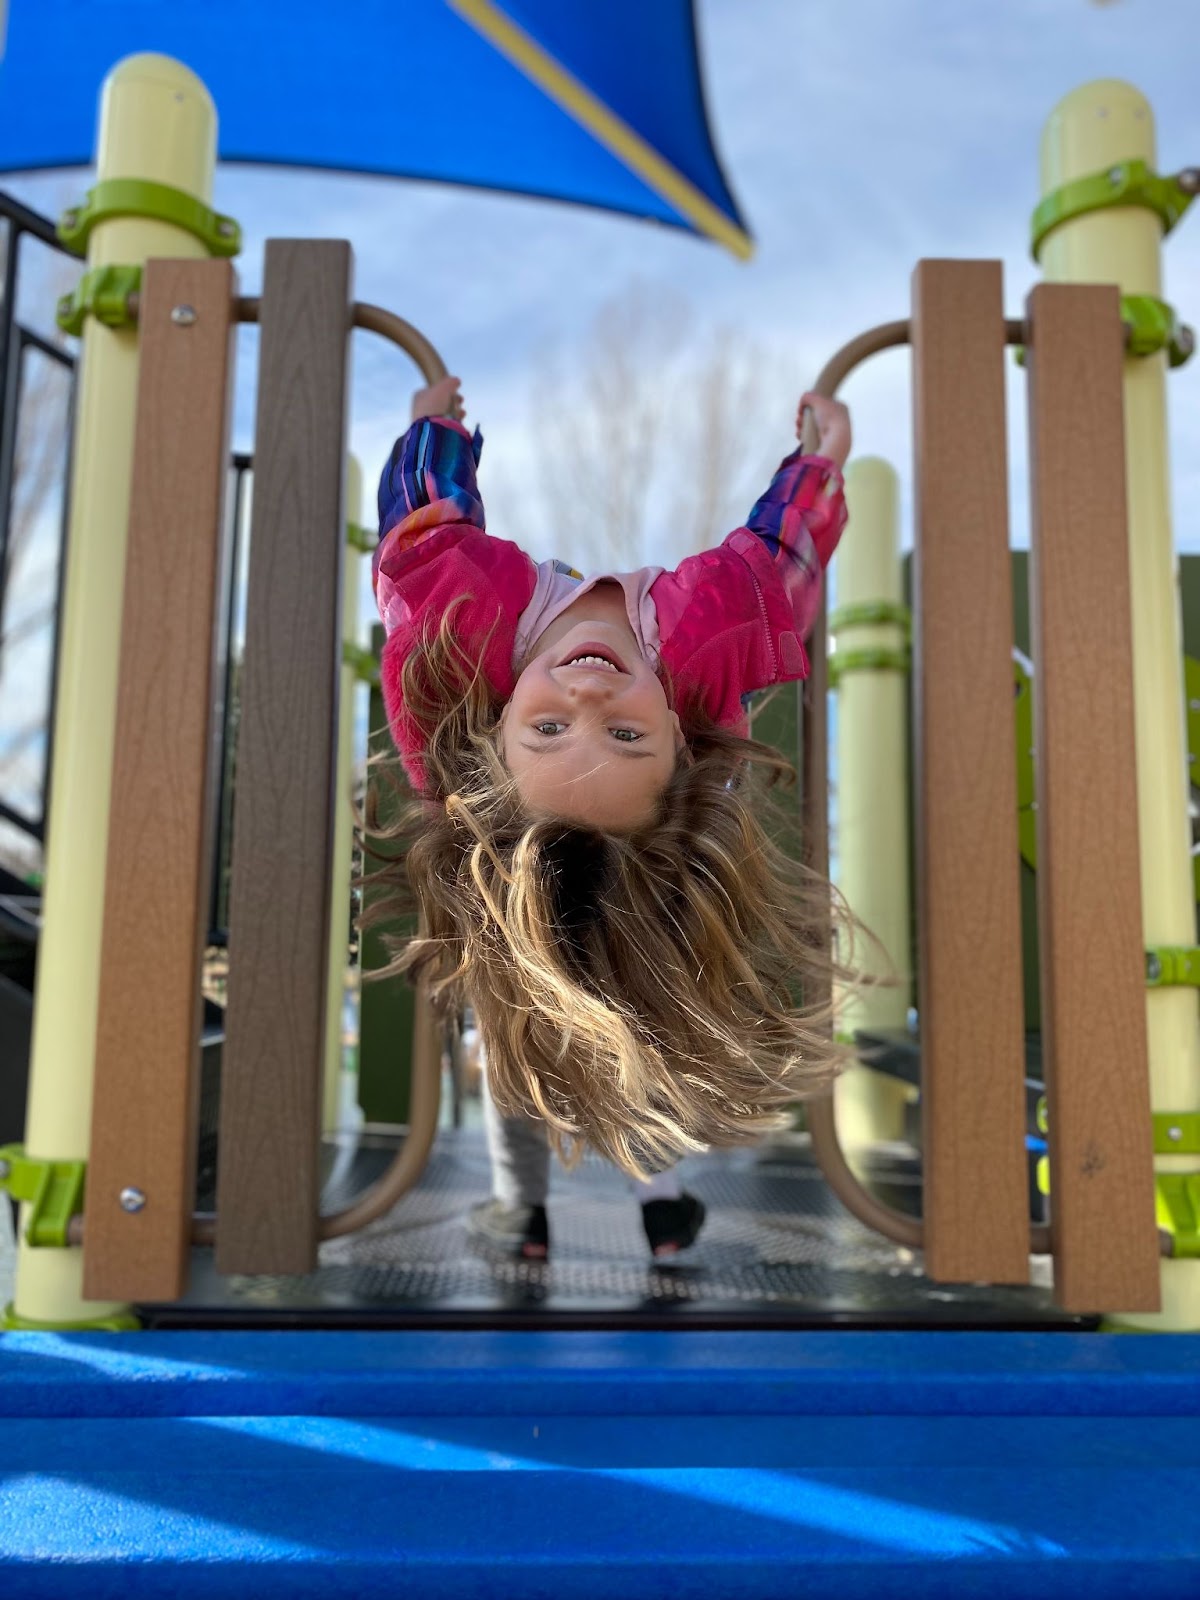 A little girl in a pink jacket hangs upside down on playground equipment